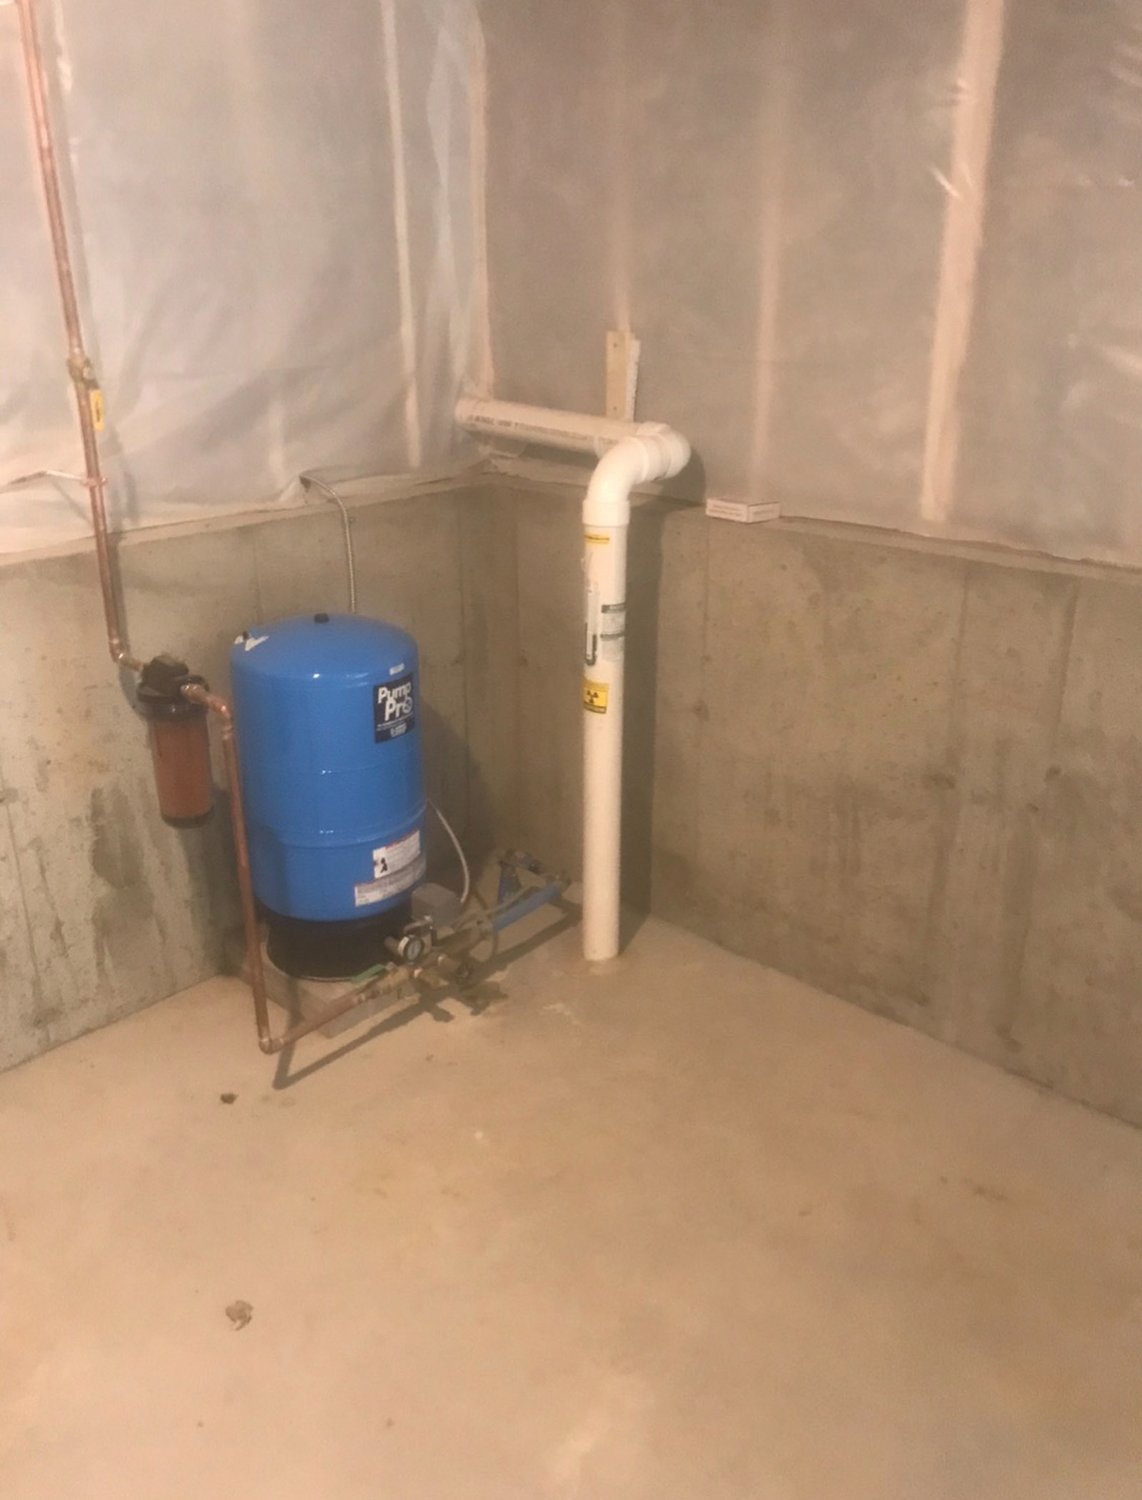 RADON SUCTION: This is the basement where we do the suction of the radon in the white pvc to exhaust outside through the mitigation fan. (Photo courtesy RMS: Radon Mitigation Services)